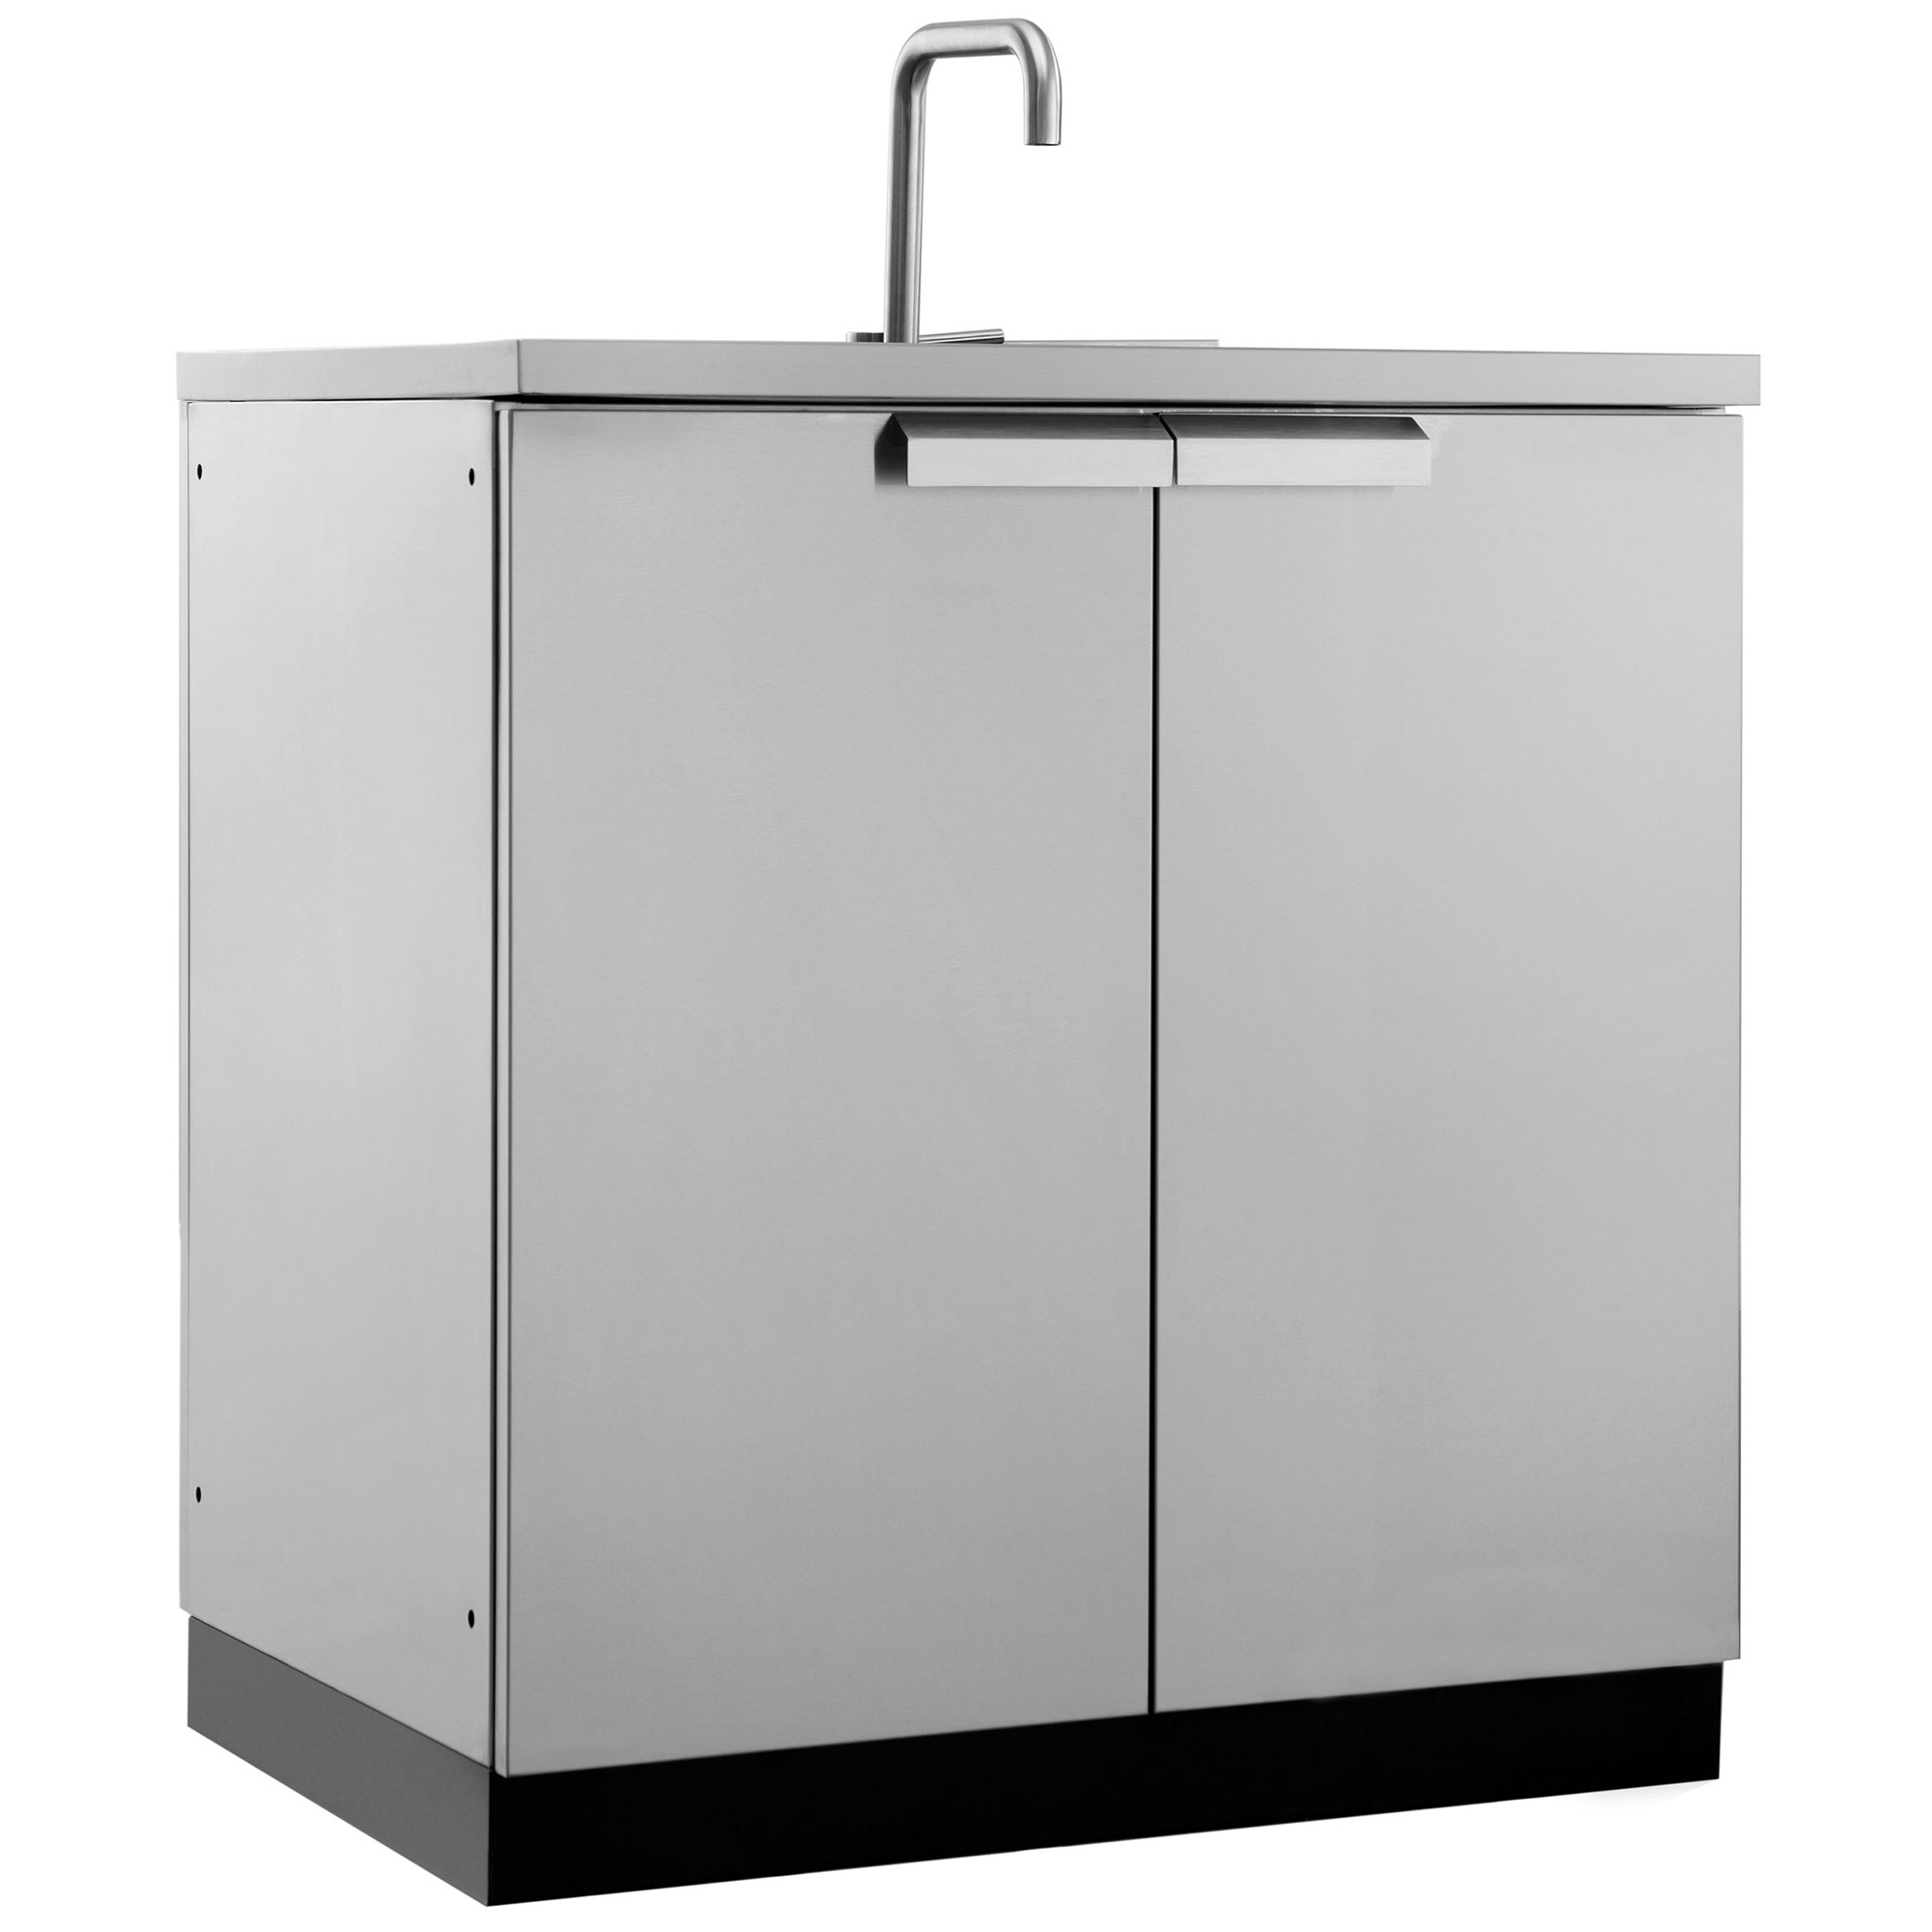 Outdoor Kitchen Sink Cabinet
 NewAge Products Outdoor Kitchen 32"W X 24"D Sink Cabinet